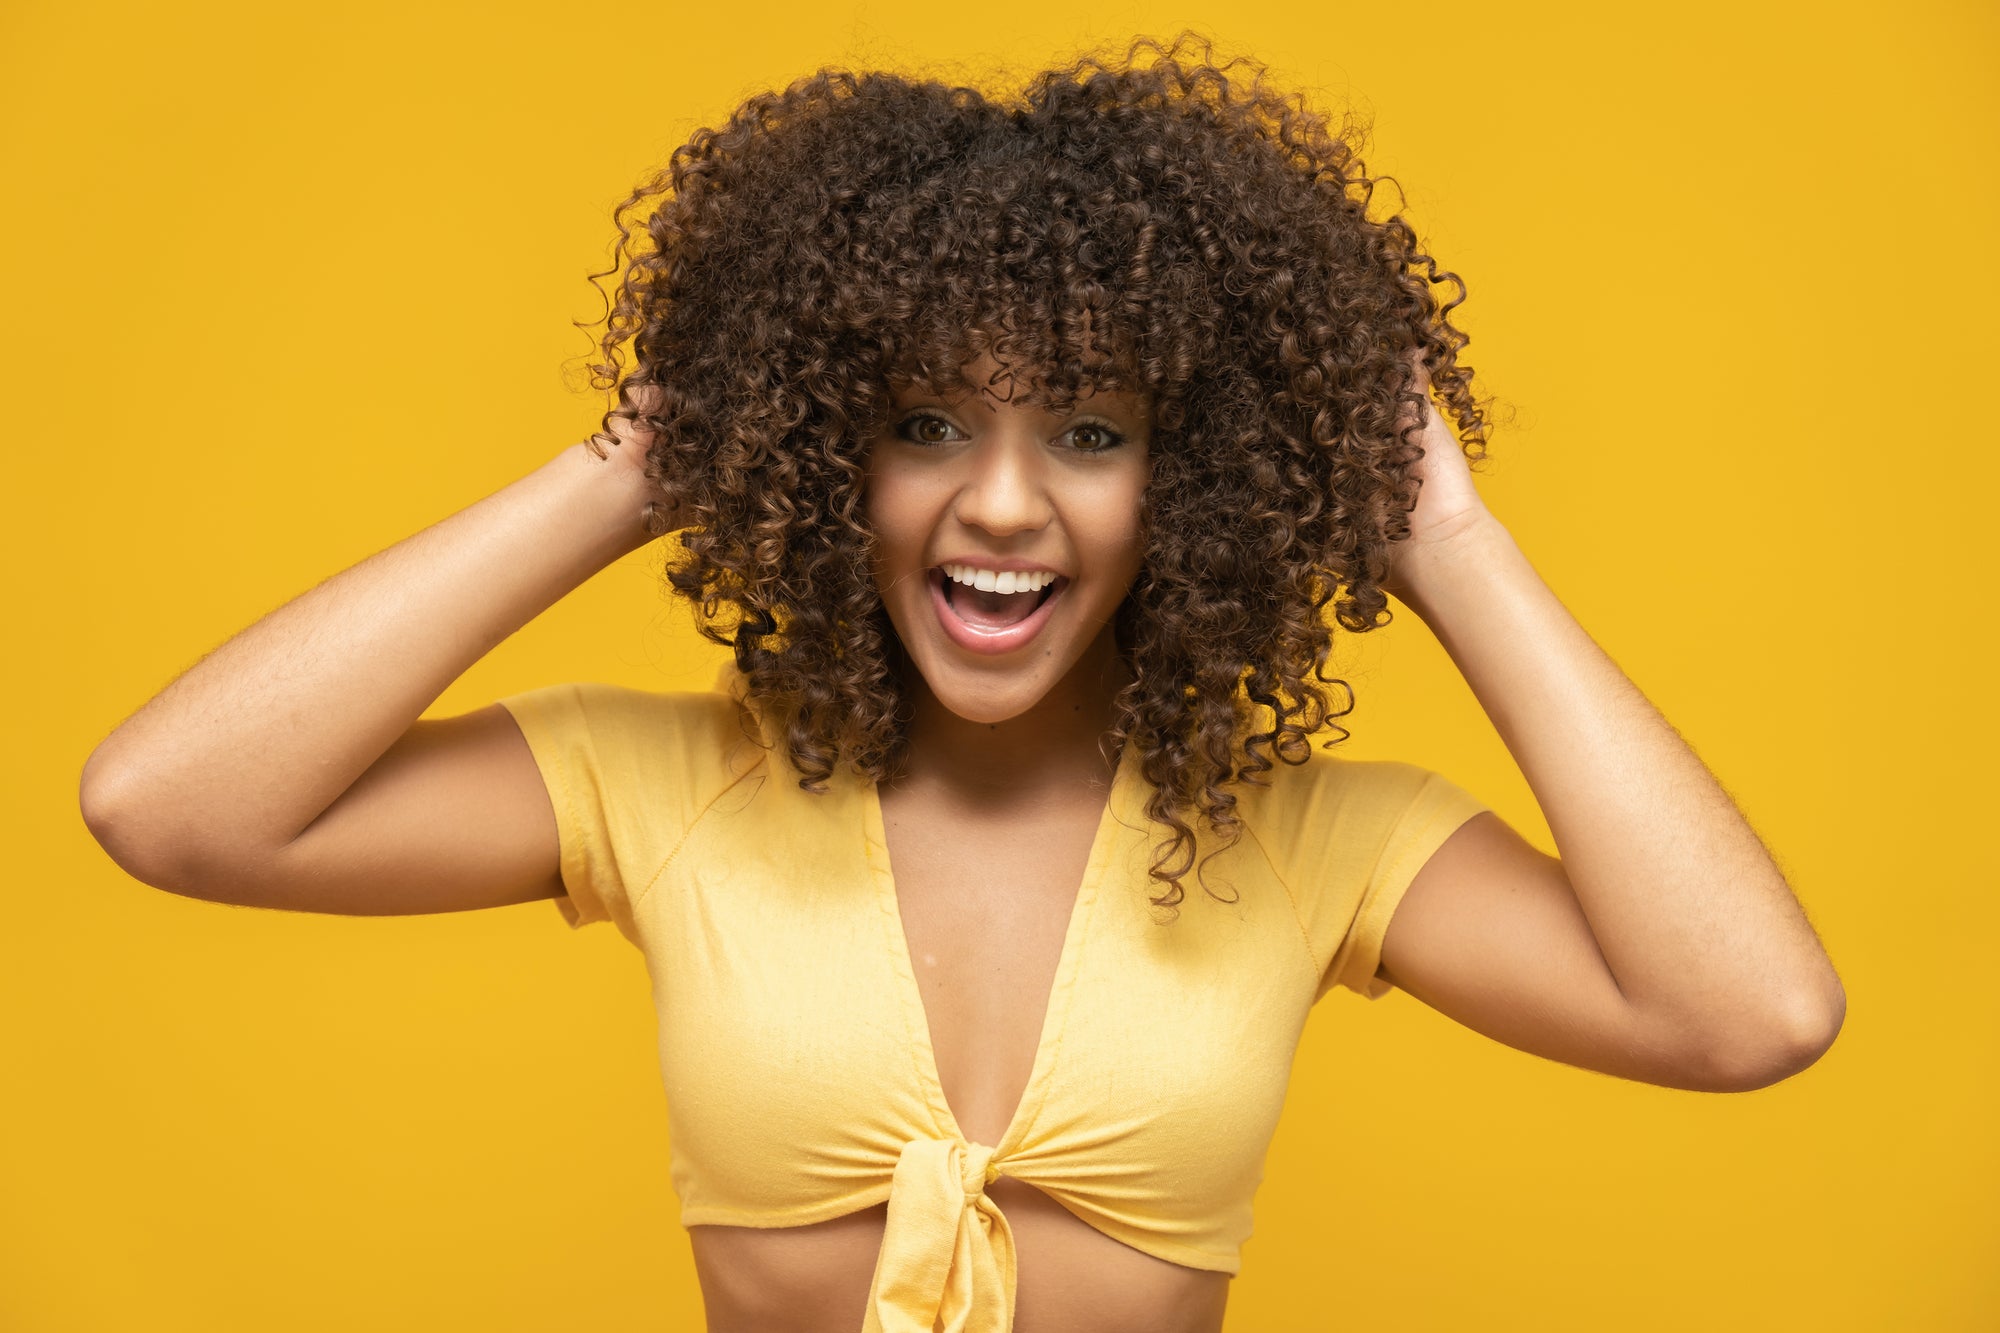 Woman with tight curls in yellow top touches hair